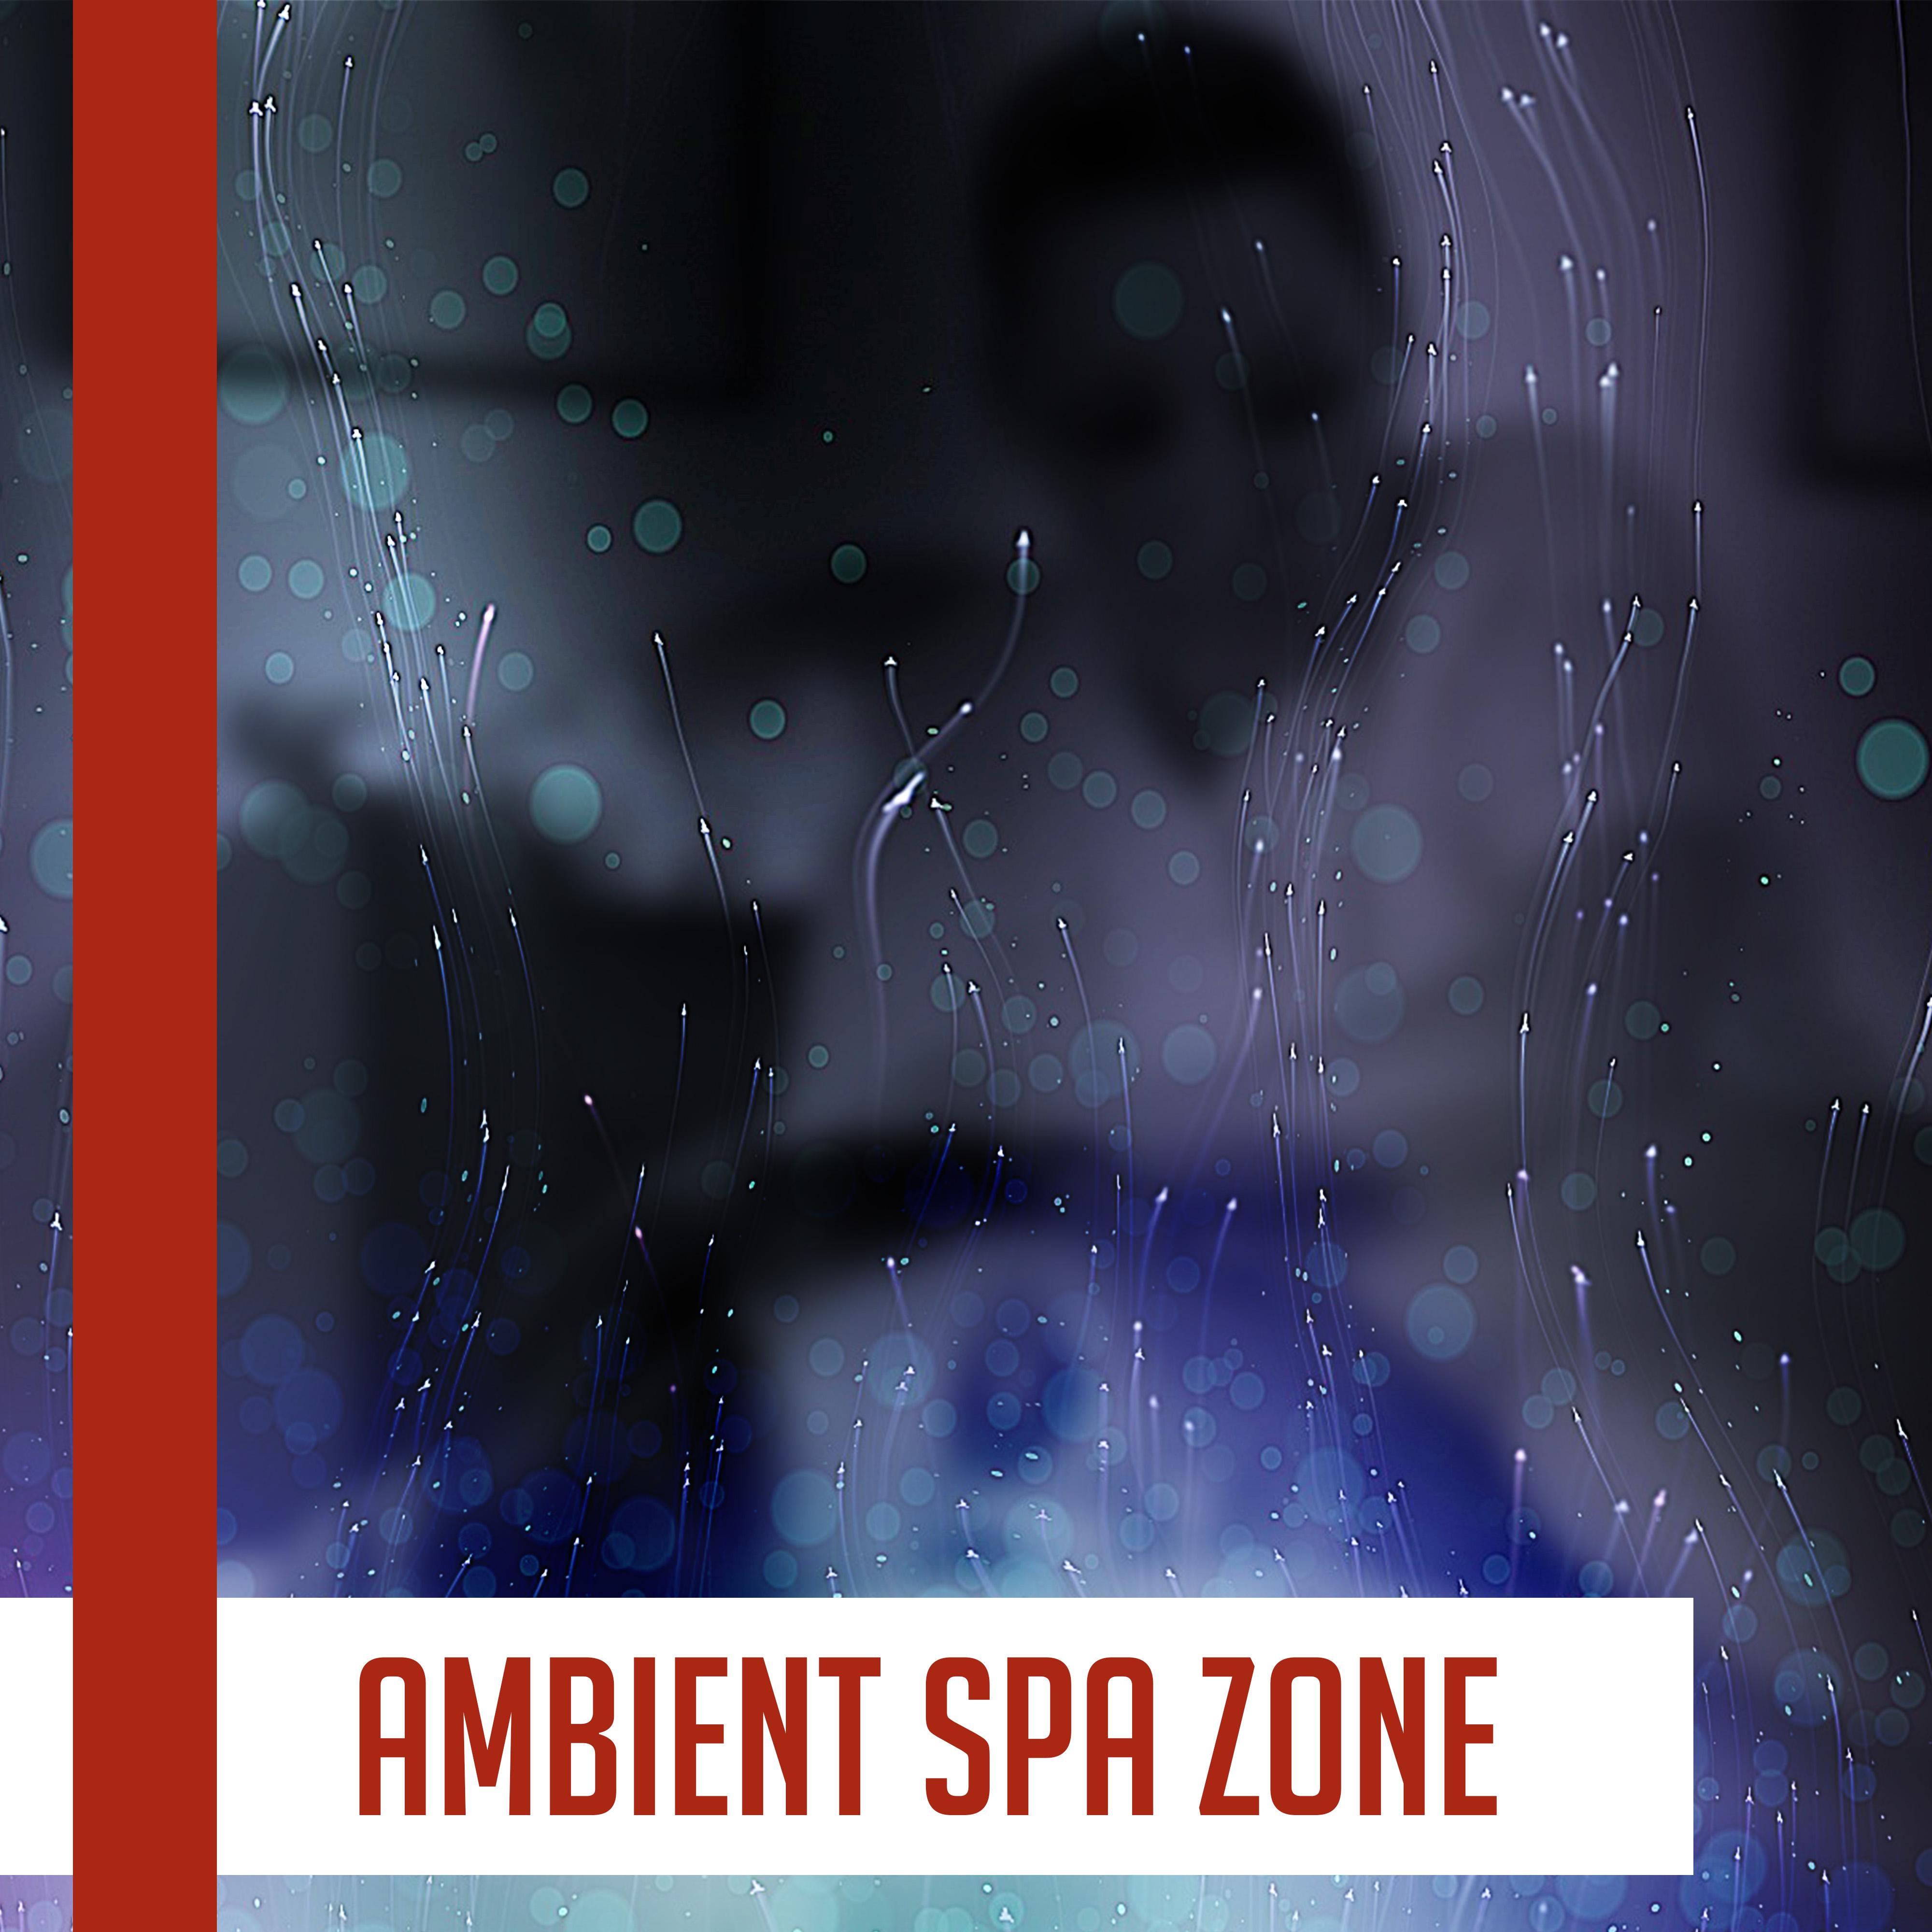 Ambient Spa Zone – Healing Sounds of Nature, Relaxing Music for Background to Hotel Spa, Beauty Parlour, Music for Massage